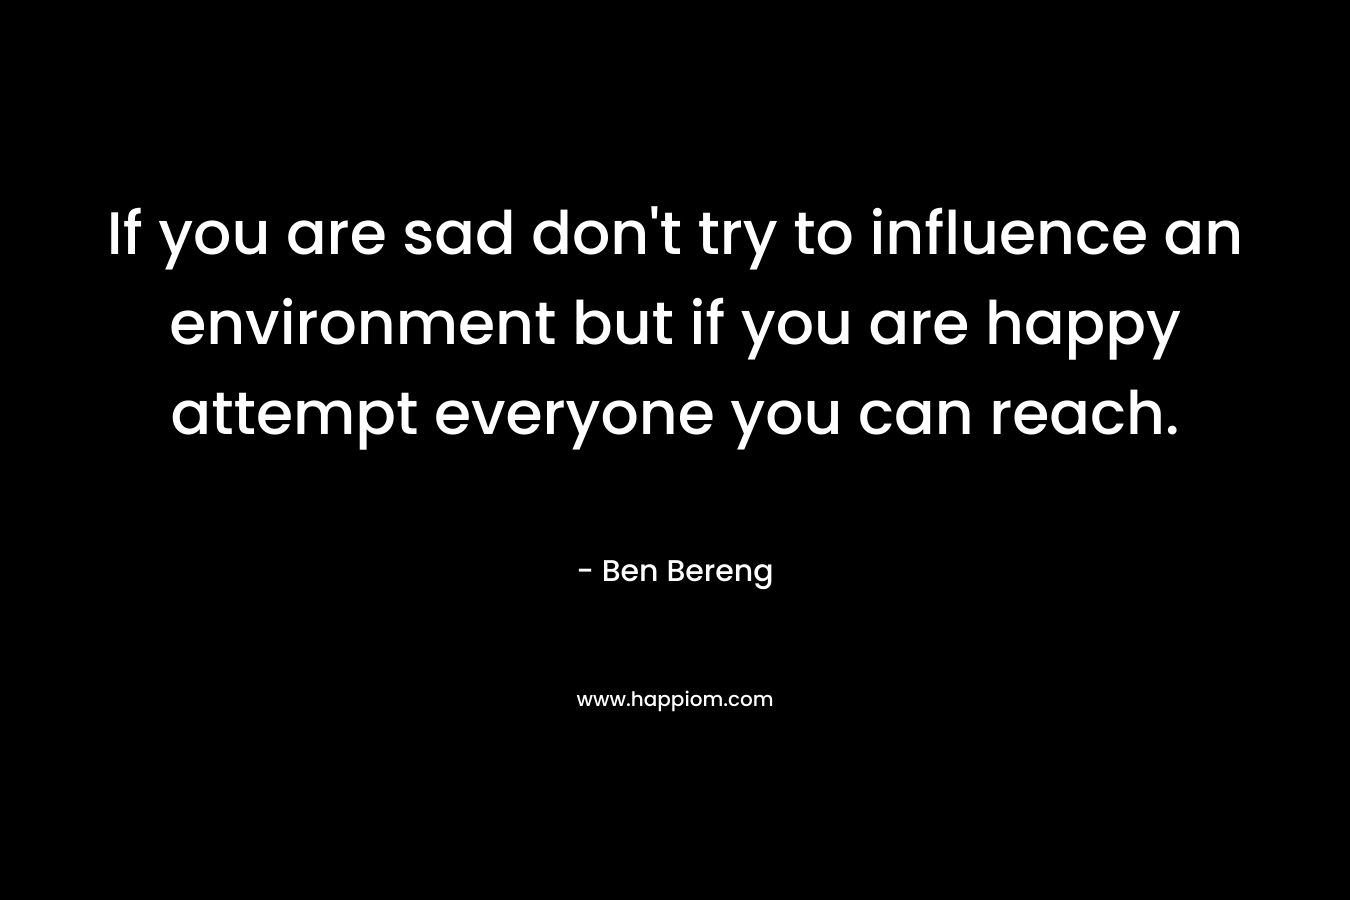 If you are sad don't try to influence an environment but if you are happy attempt everyone you can reach.